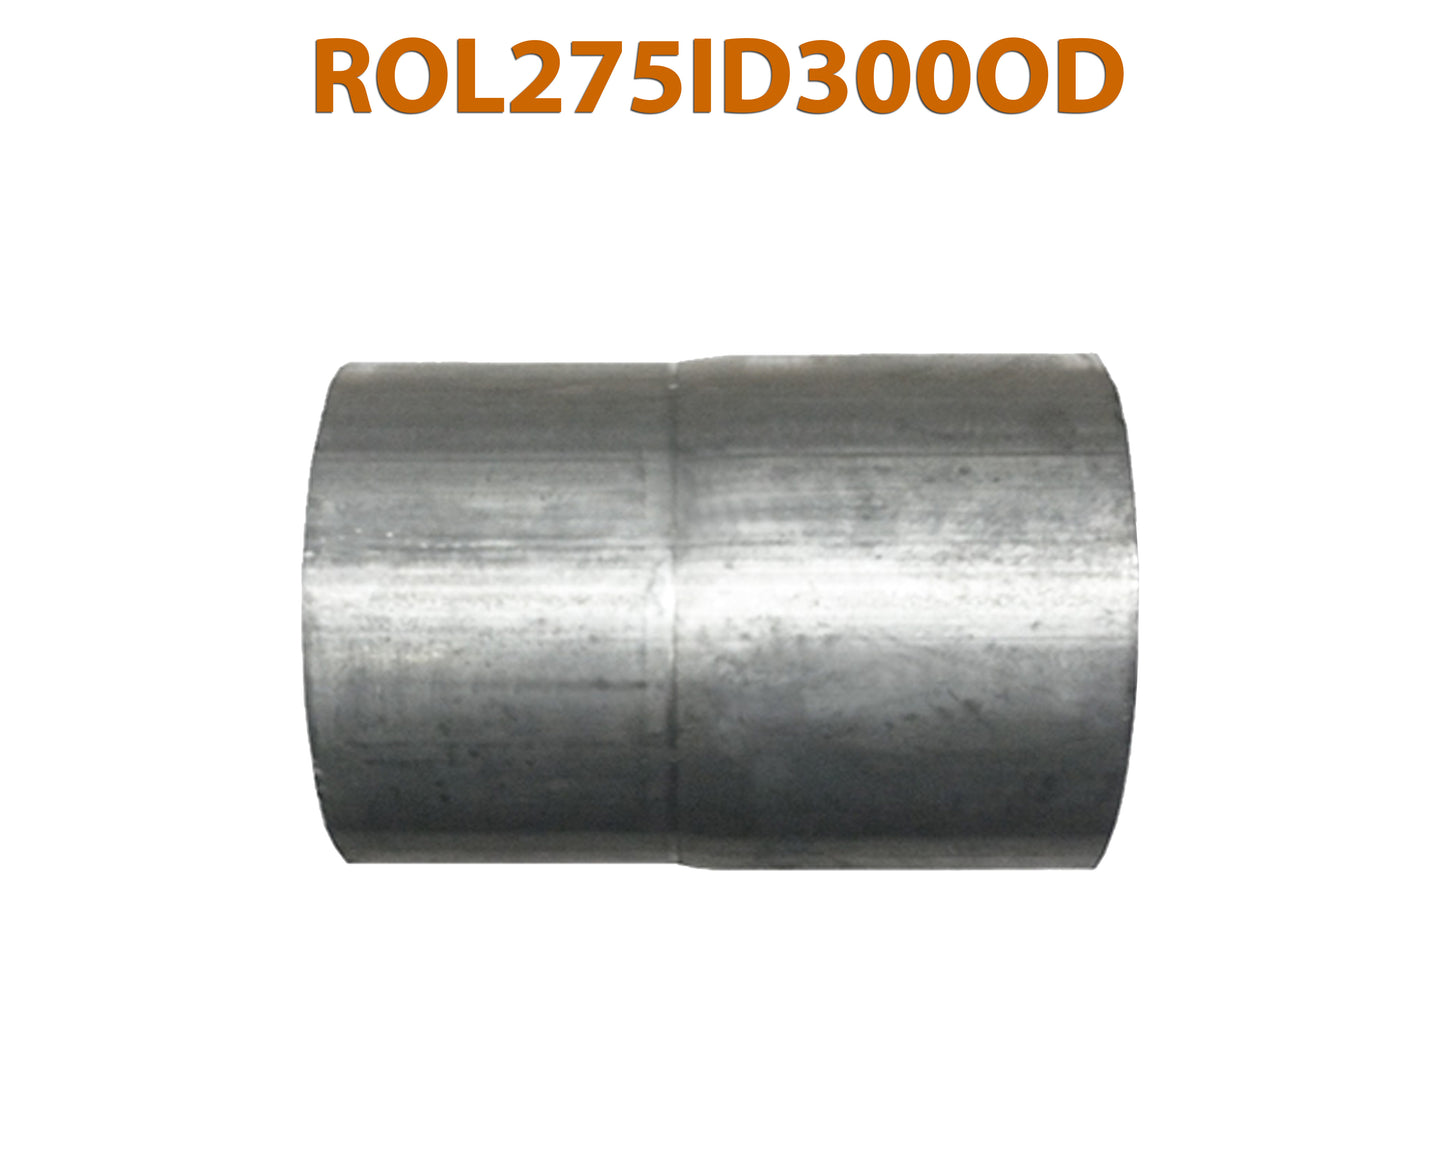 ROL275ID300OD 548588 2 3/4" ID to 3" OD Universal Exhaust Pipe to Component Adapter Reducer